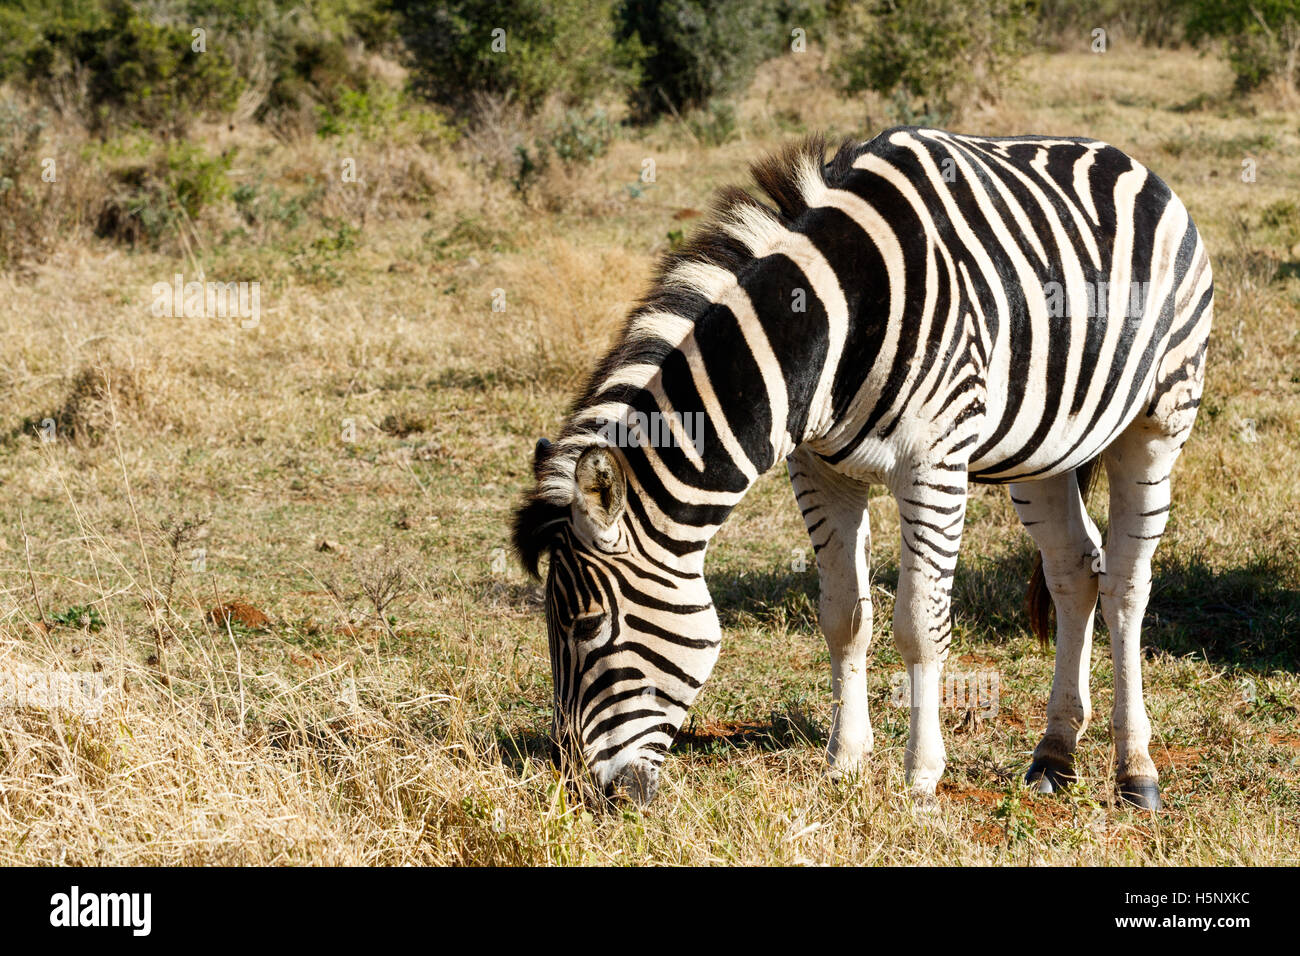 Burchell's Zebra eating grass in the field. Stock Photo